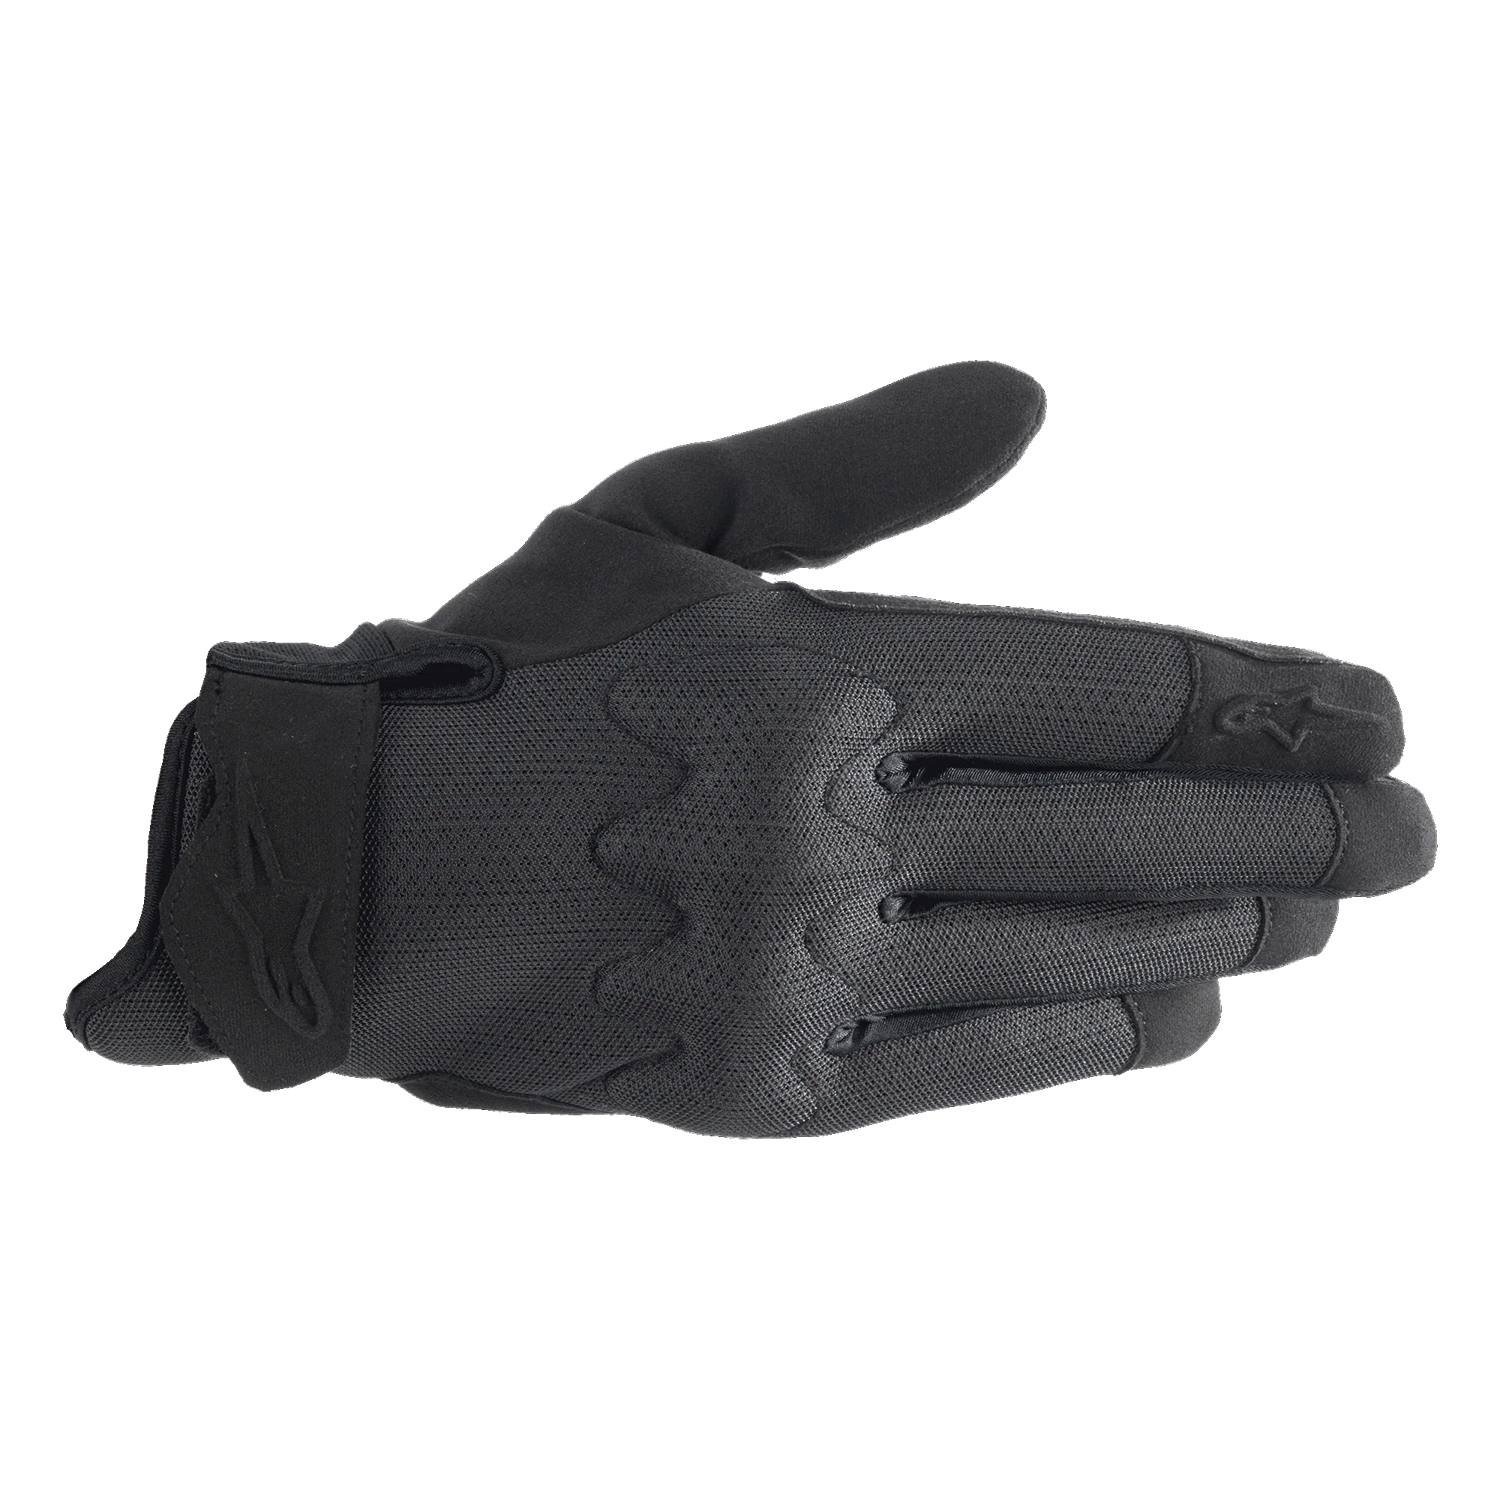 Image of Alpinestars Stated Air Gloves Black Size 3XL ID 8059347168630